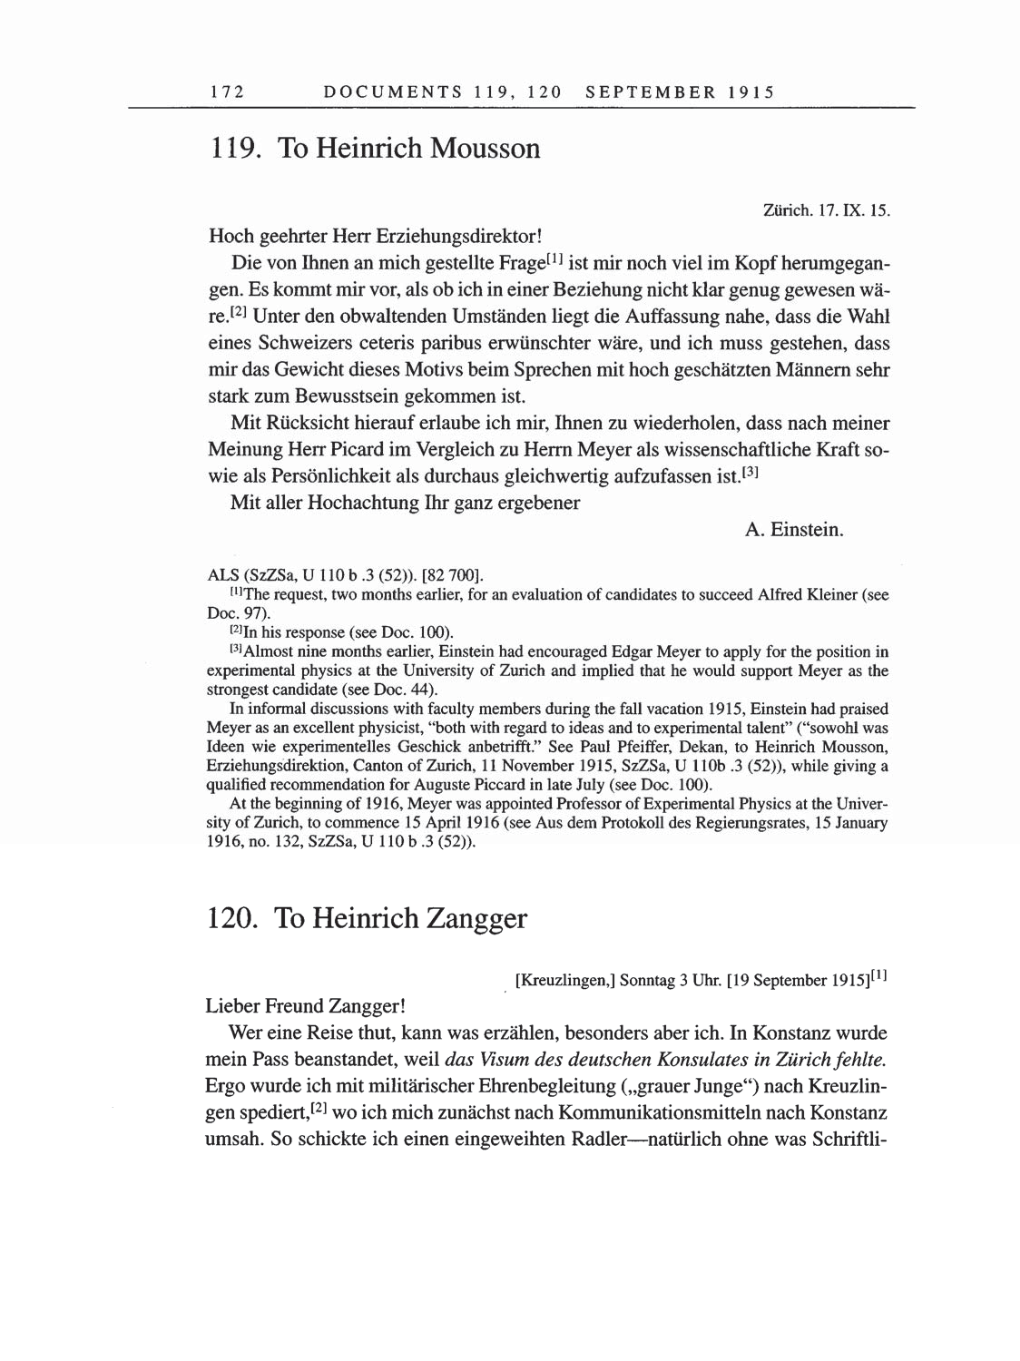 Volume 8, Part A: The Berlin Years: Correspondence 1914-1917 page 172